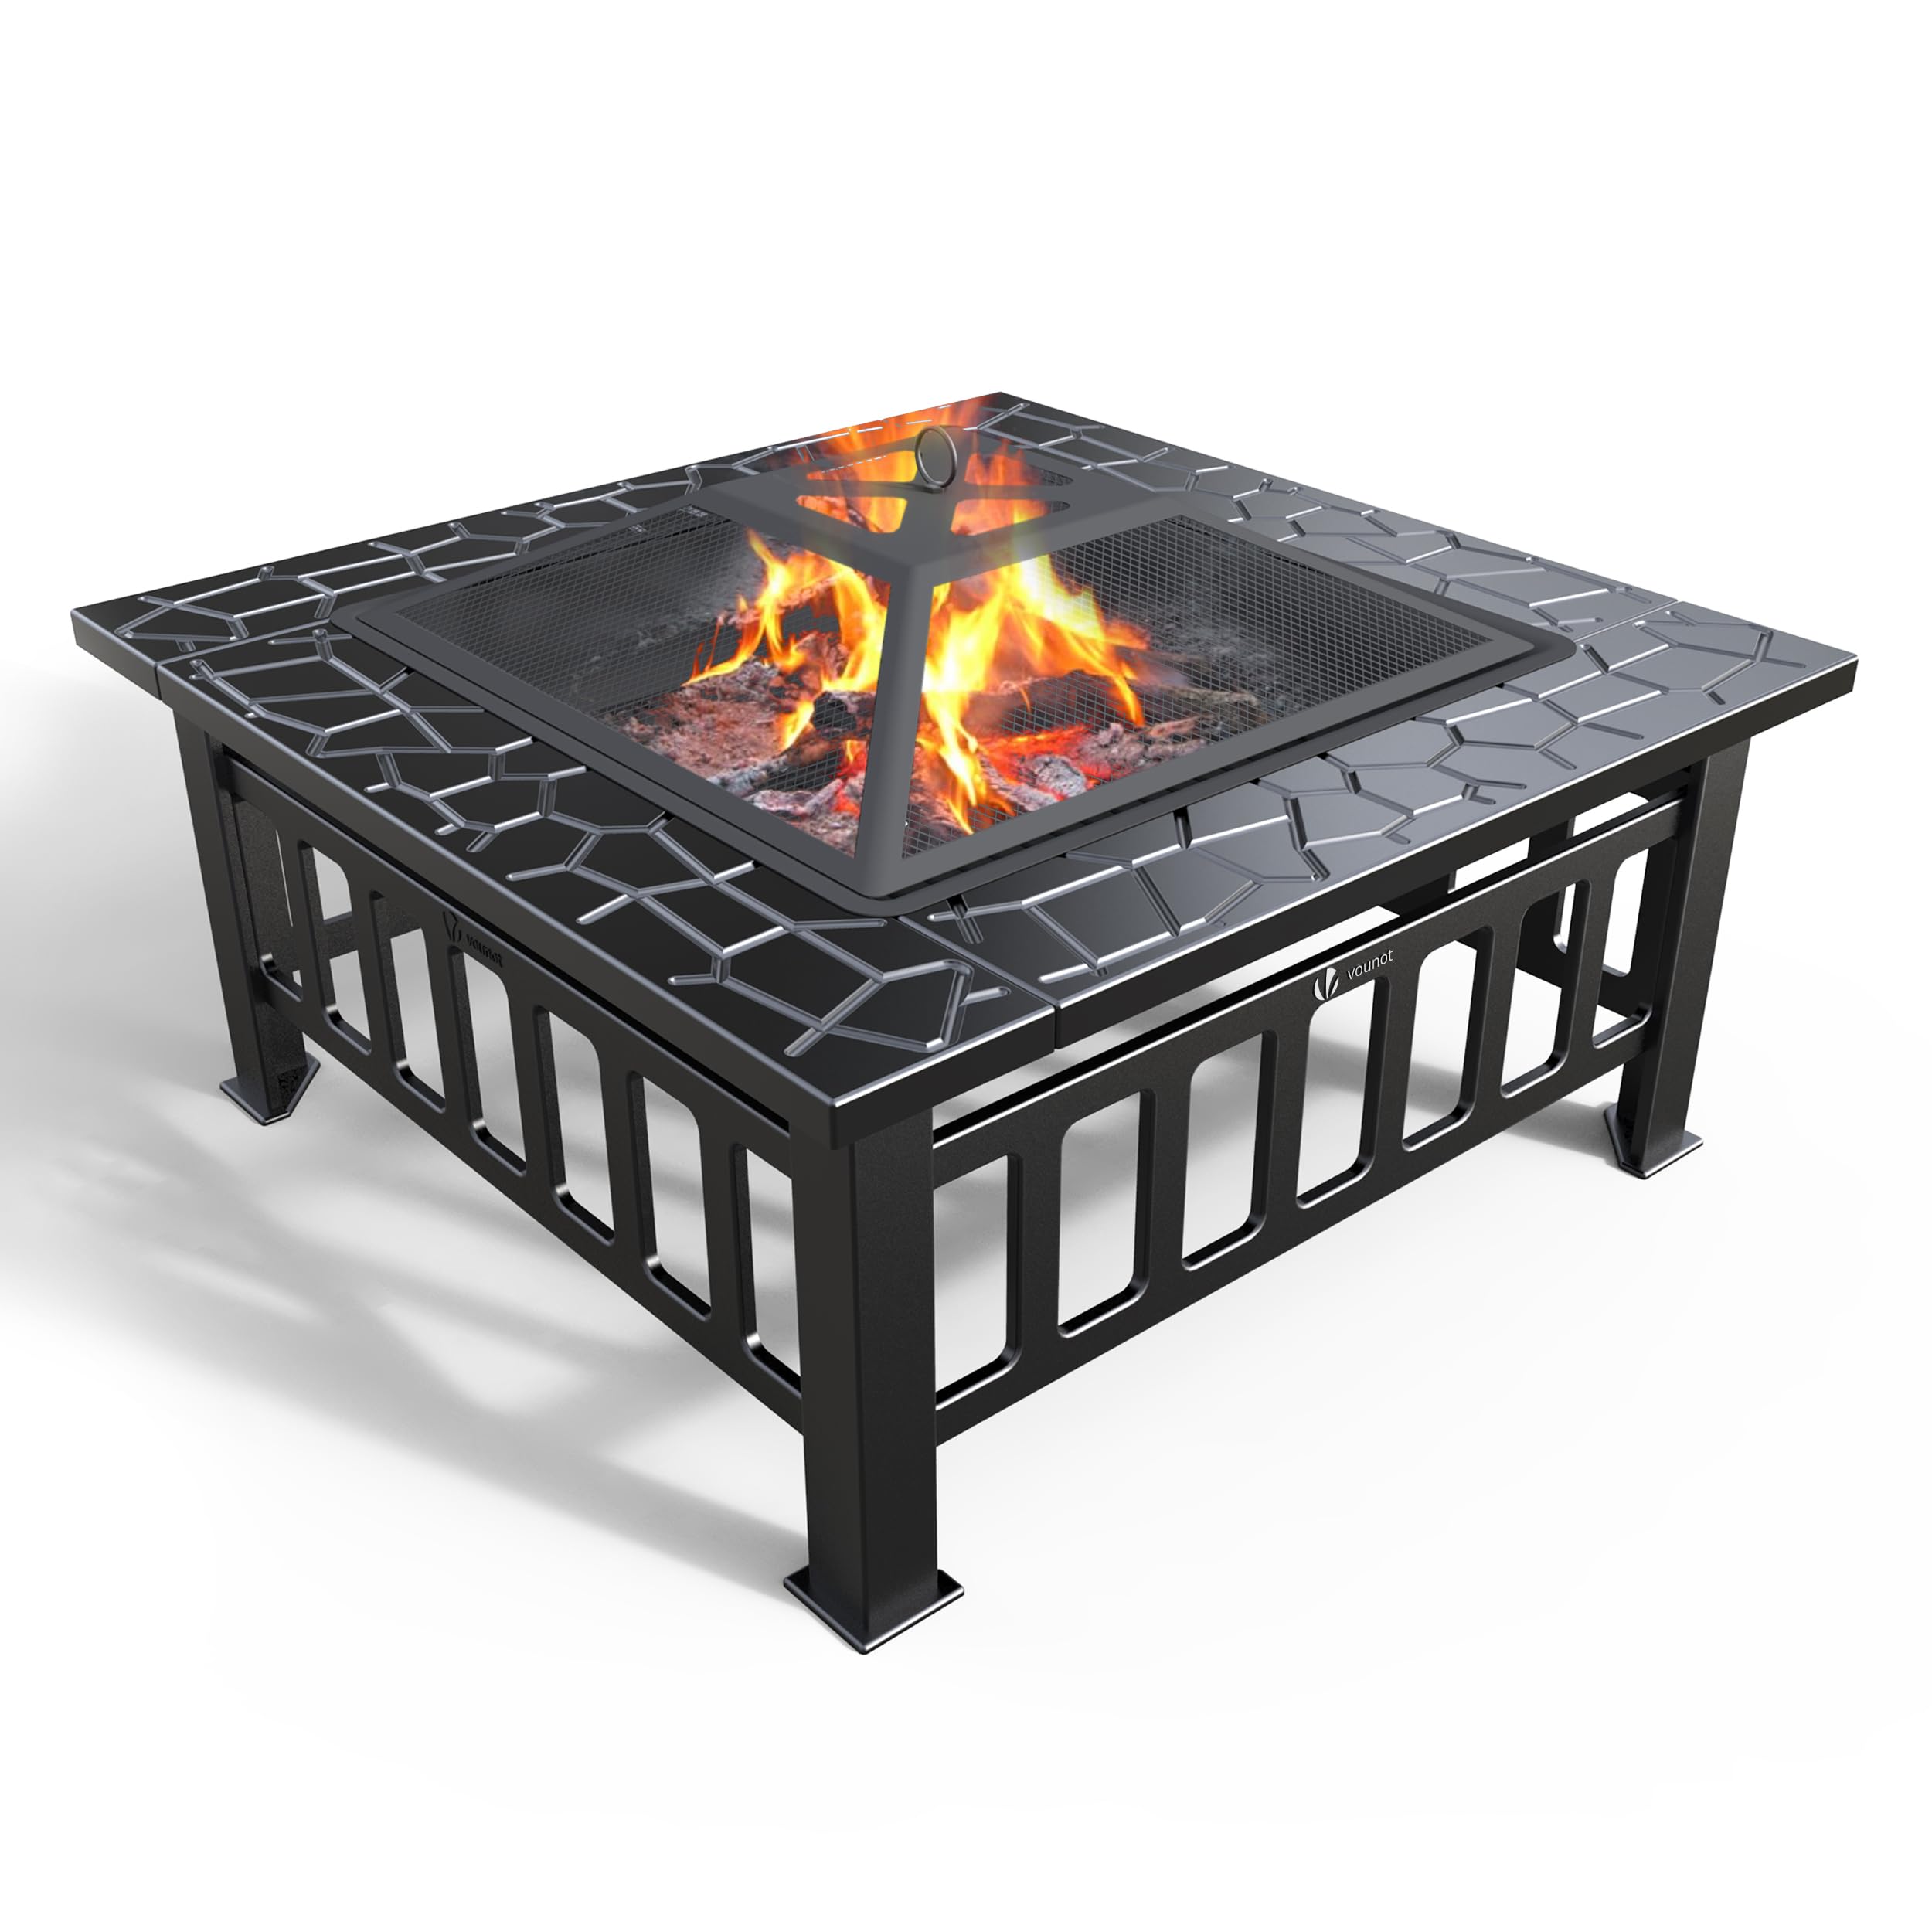 VOUNOT Outdoor Brazier for garden Terraces BBQ 3 in 1 Outdoor Fire for Summer and Fireplace and Barbecue Brazier 81 * 81 * 45cm 